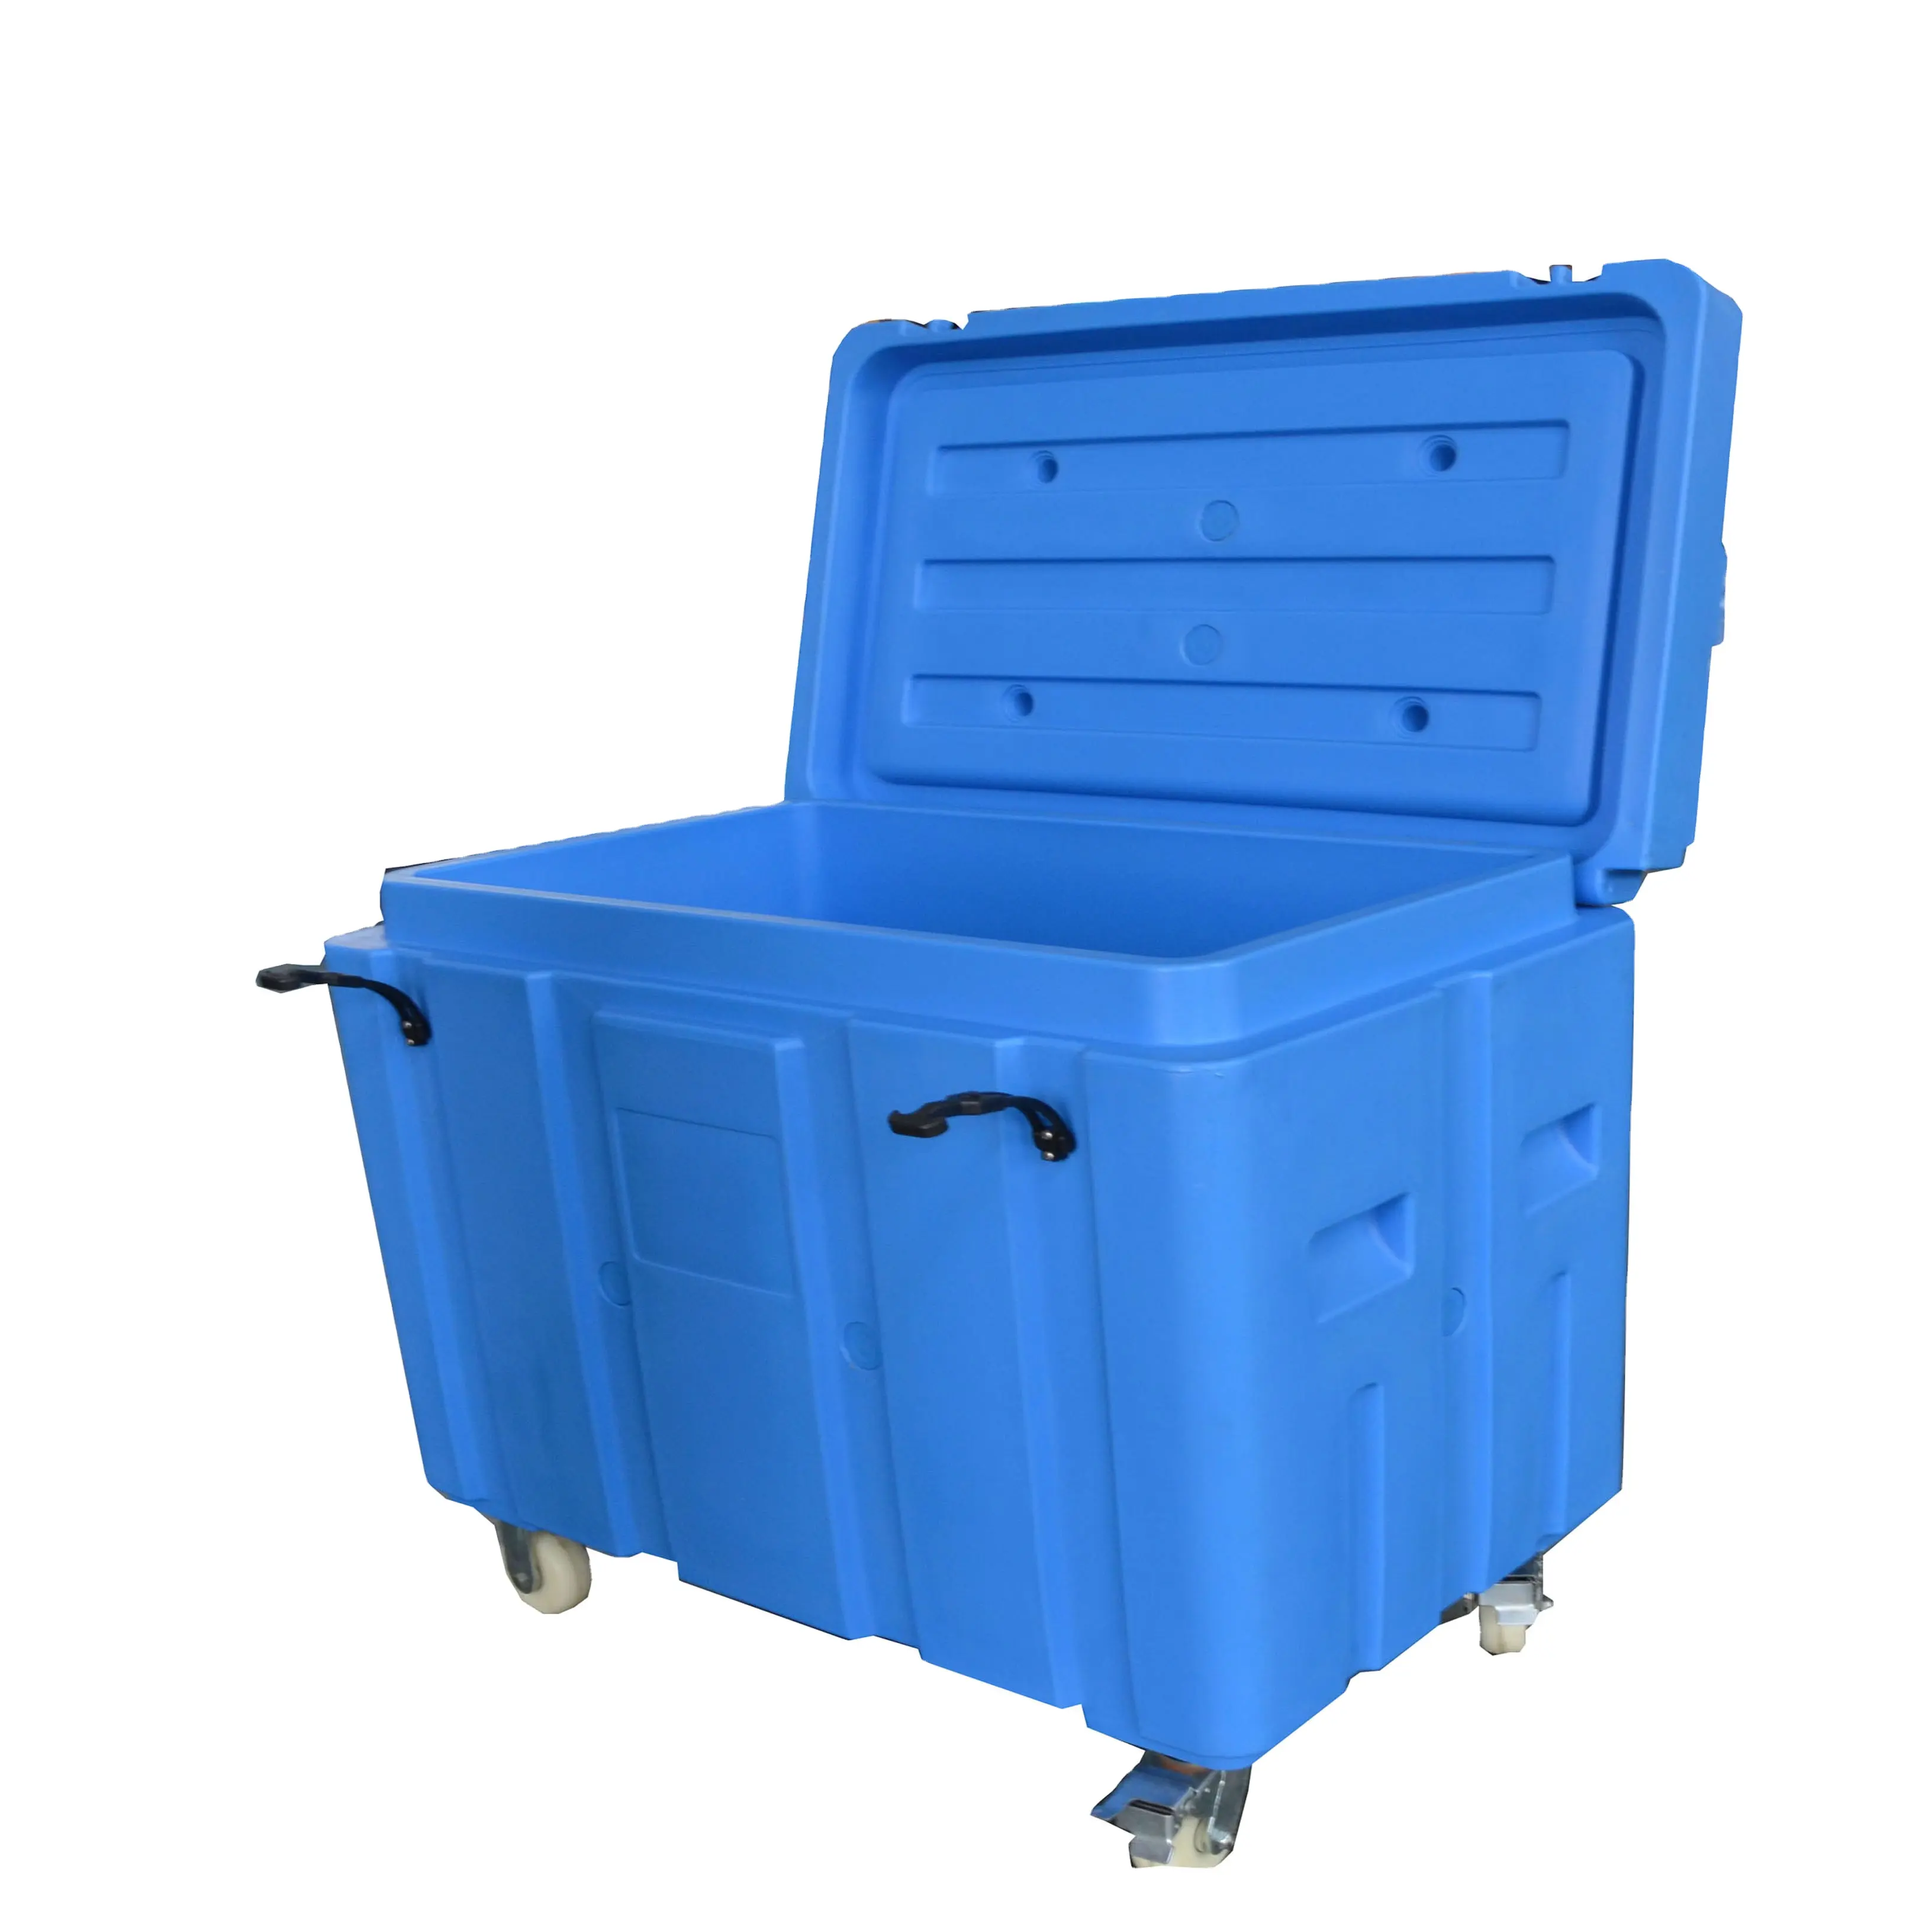 330L large cooler dry ice container dry ice storage chest/dry ice bins